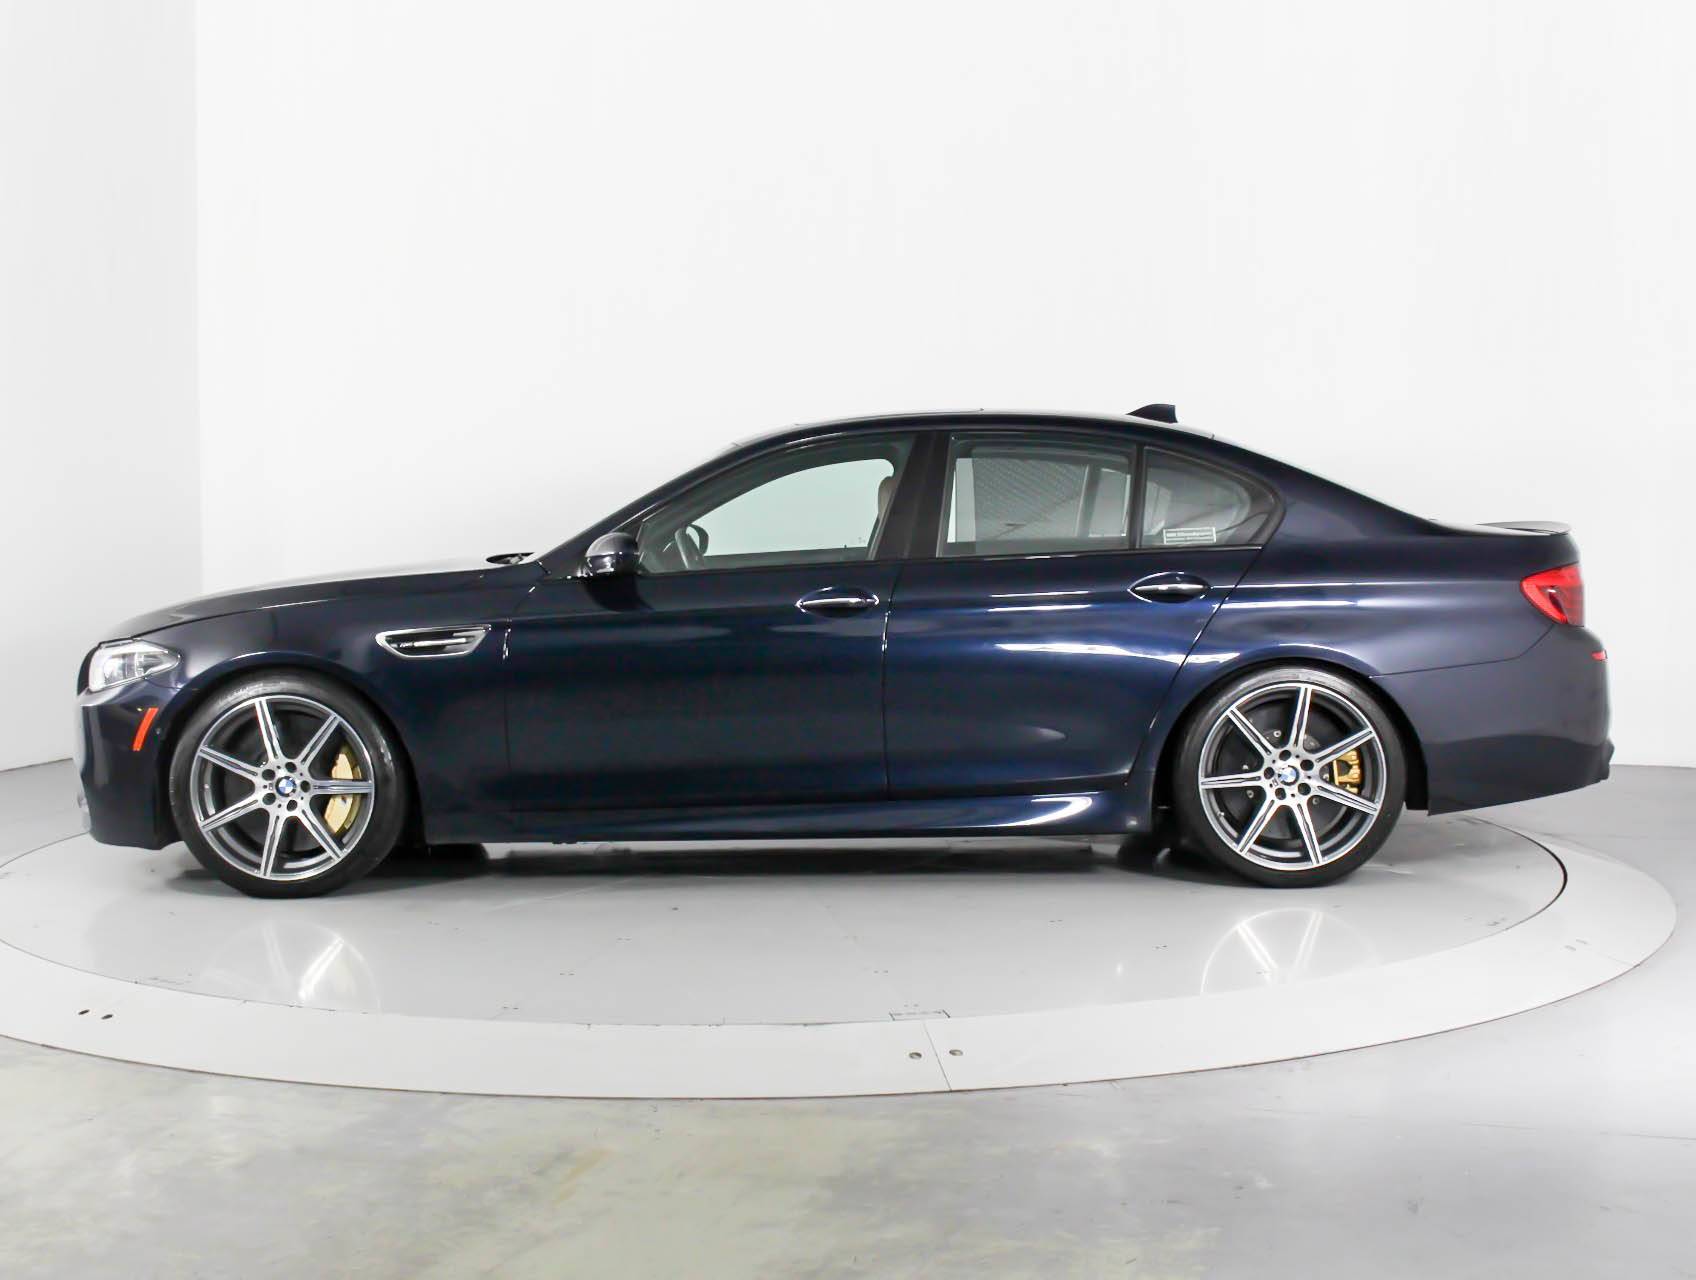 Florida Fine Cars - Used BMW M5 2015 WEST PALM Competition Package